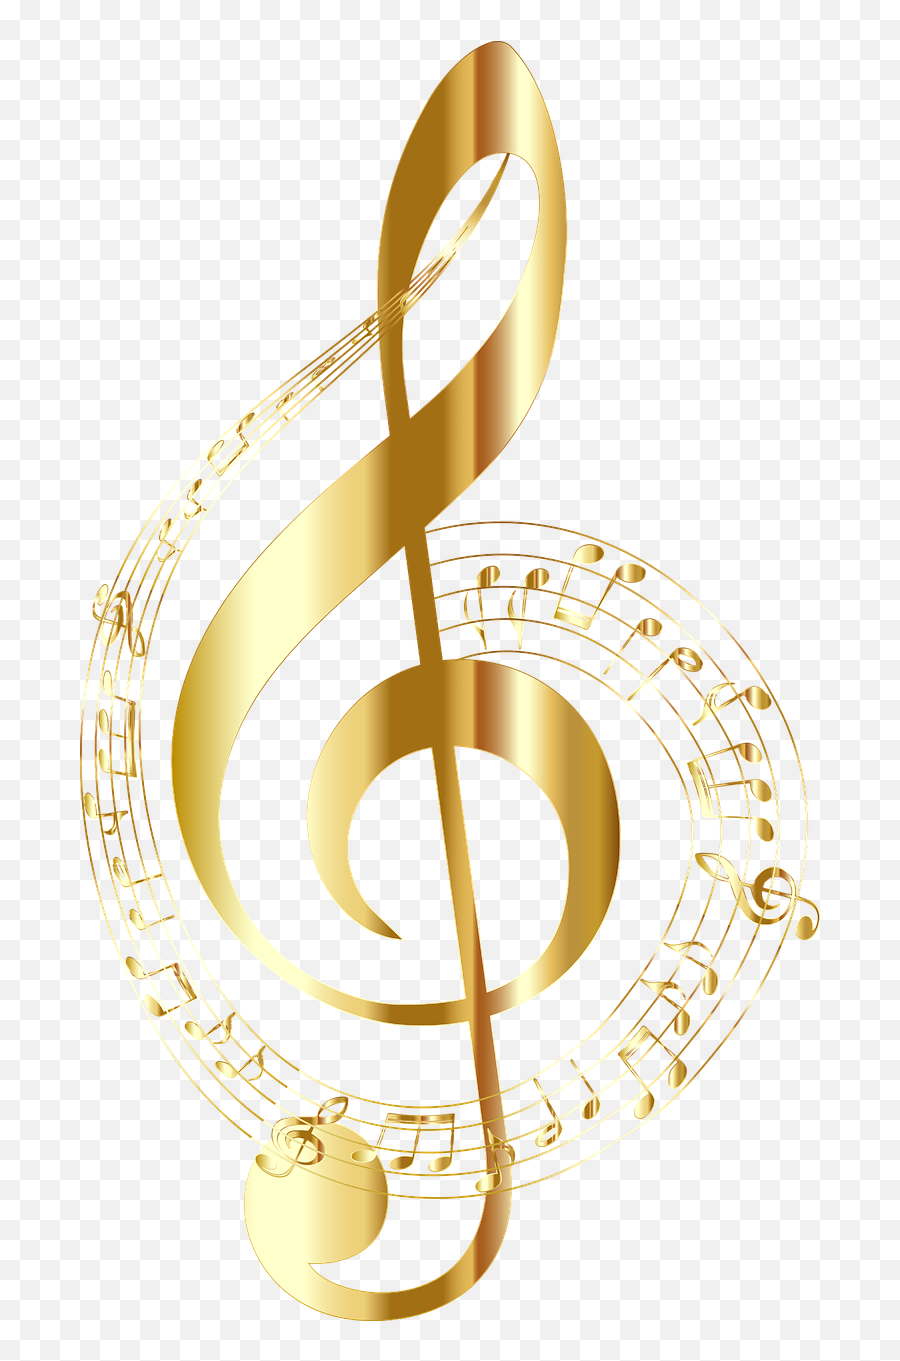 Iu0027m Thankful For The Ability To Hear Music Notes Music Emoji,Musical Symbol Clipart